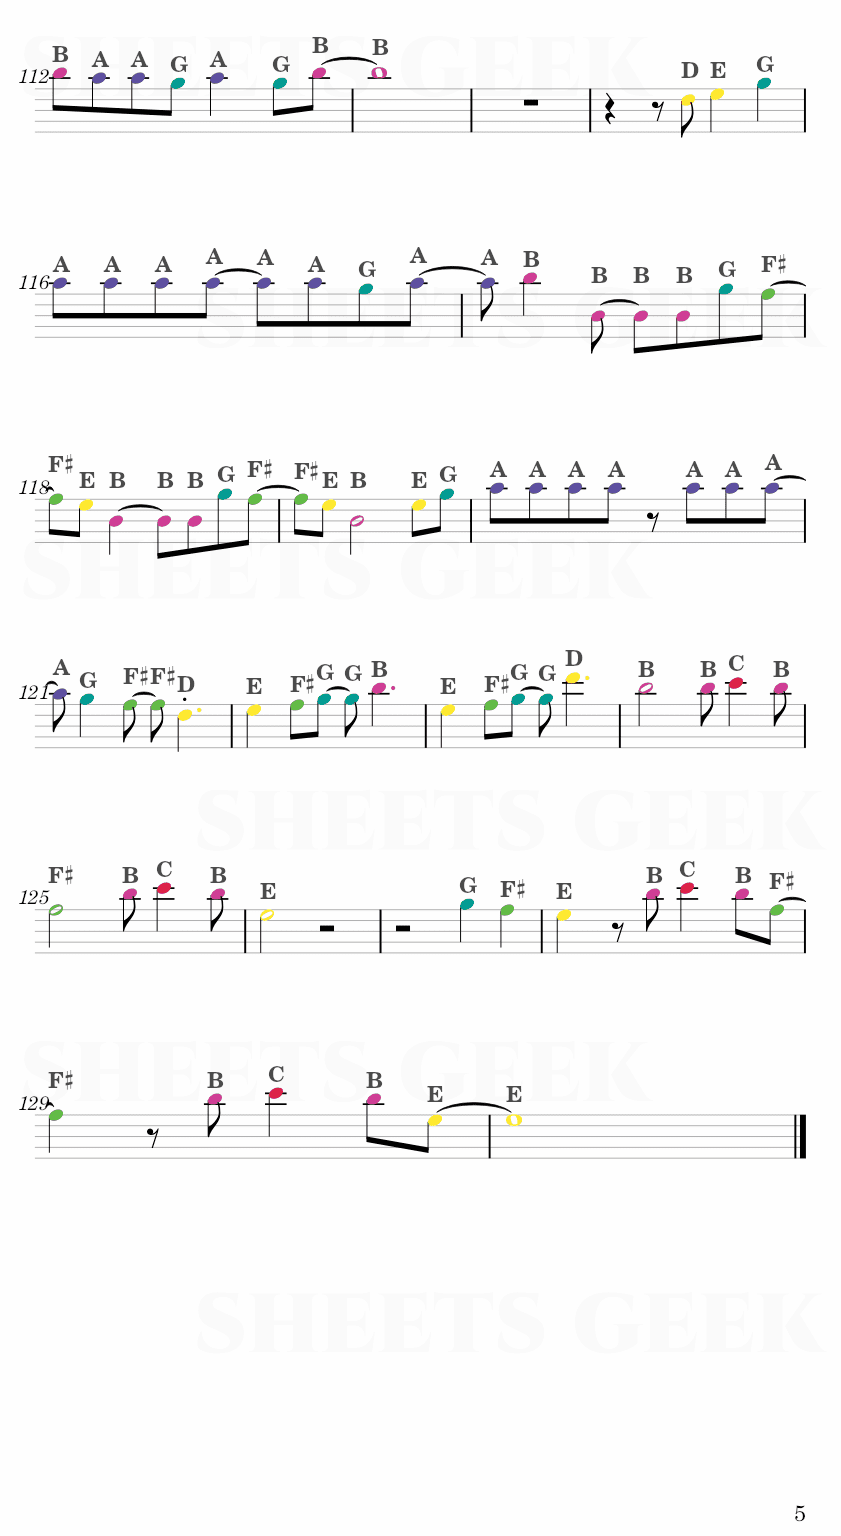 Inception - ATEEZ Easy Sheet Music Free for piano, keyboard, flute, violin, sax, cello page 5